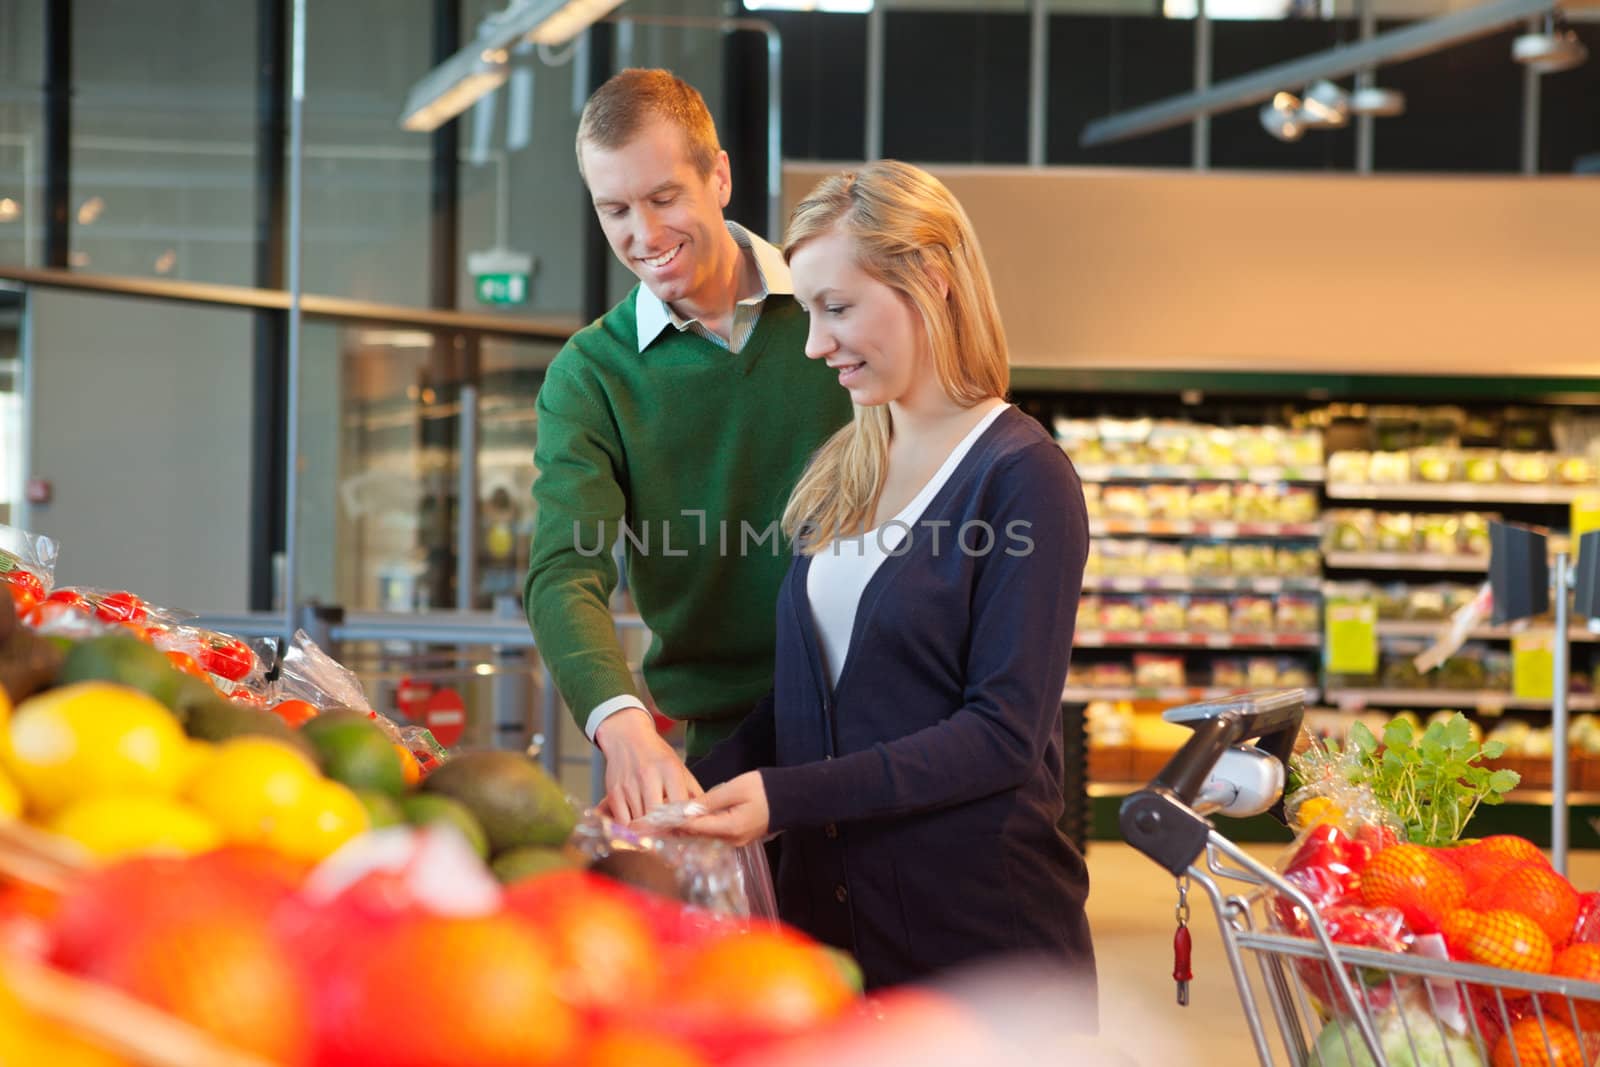 Man and woman looking at products and smiling in shopping store